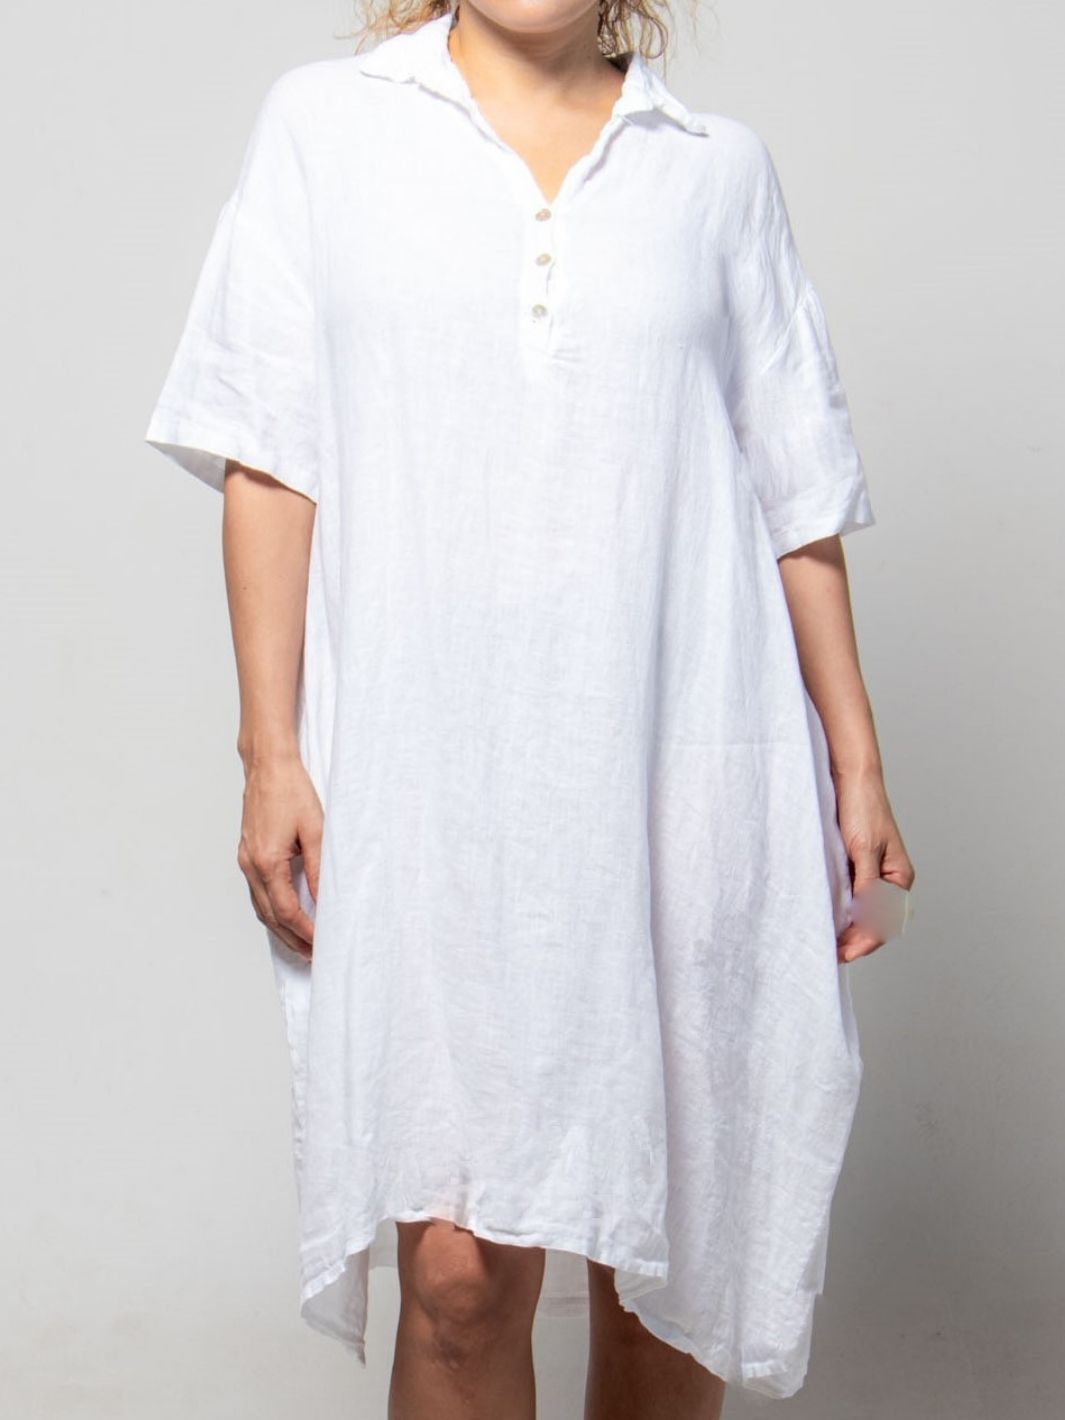 Collared Linen Dress with Buttons - White